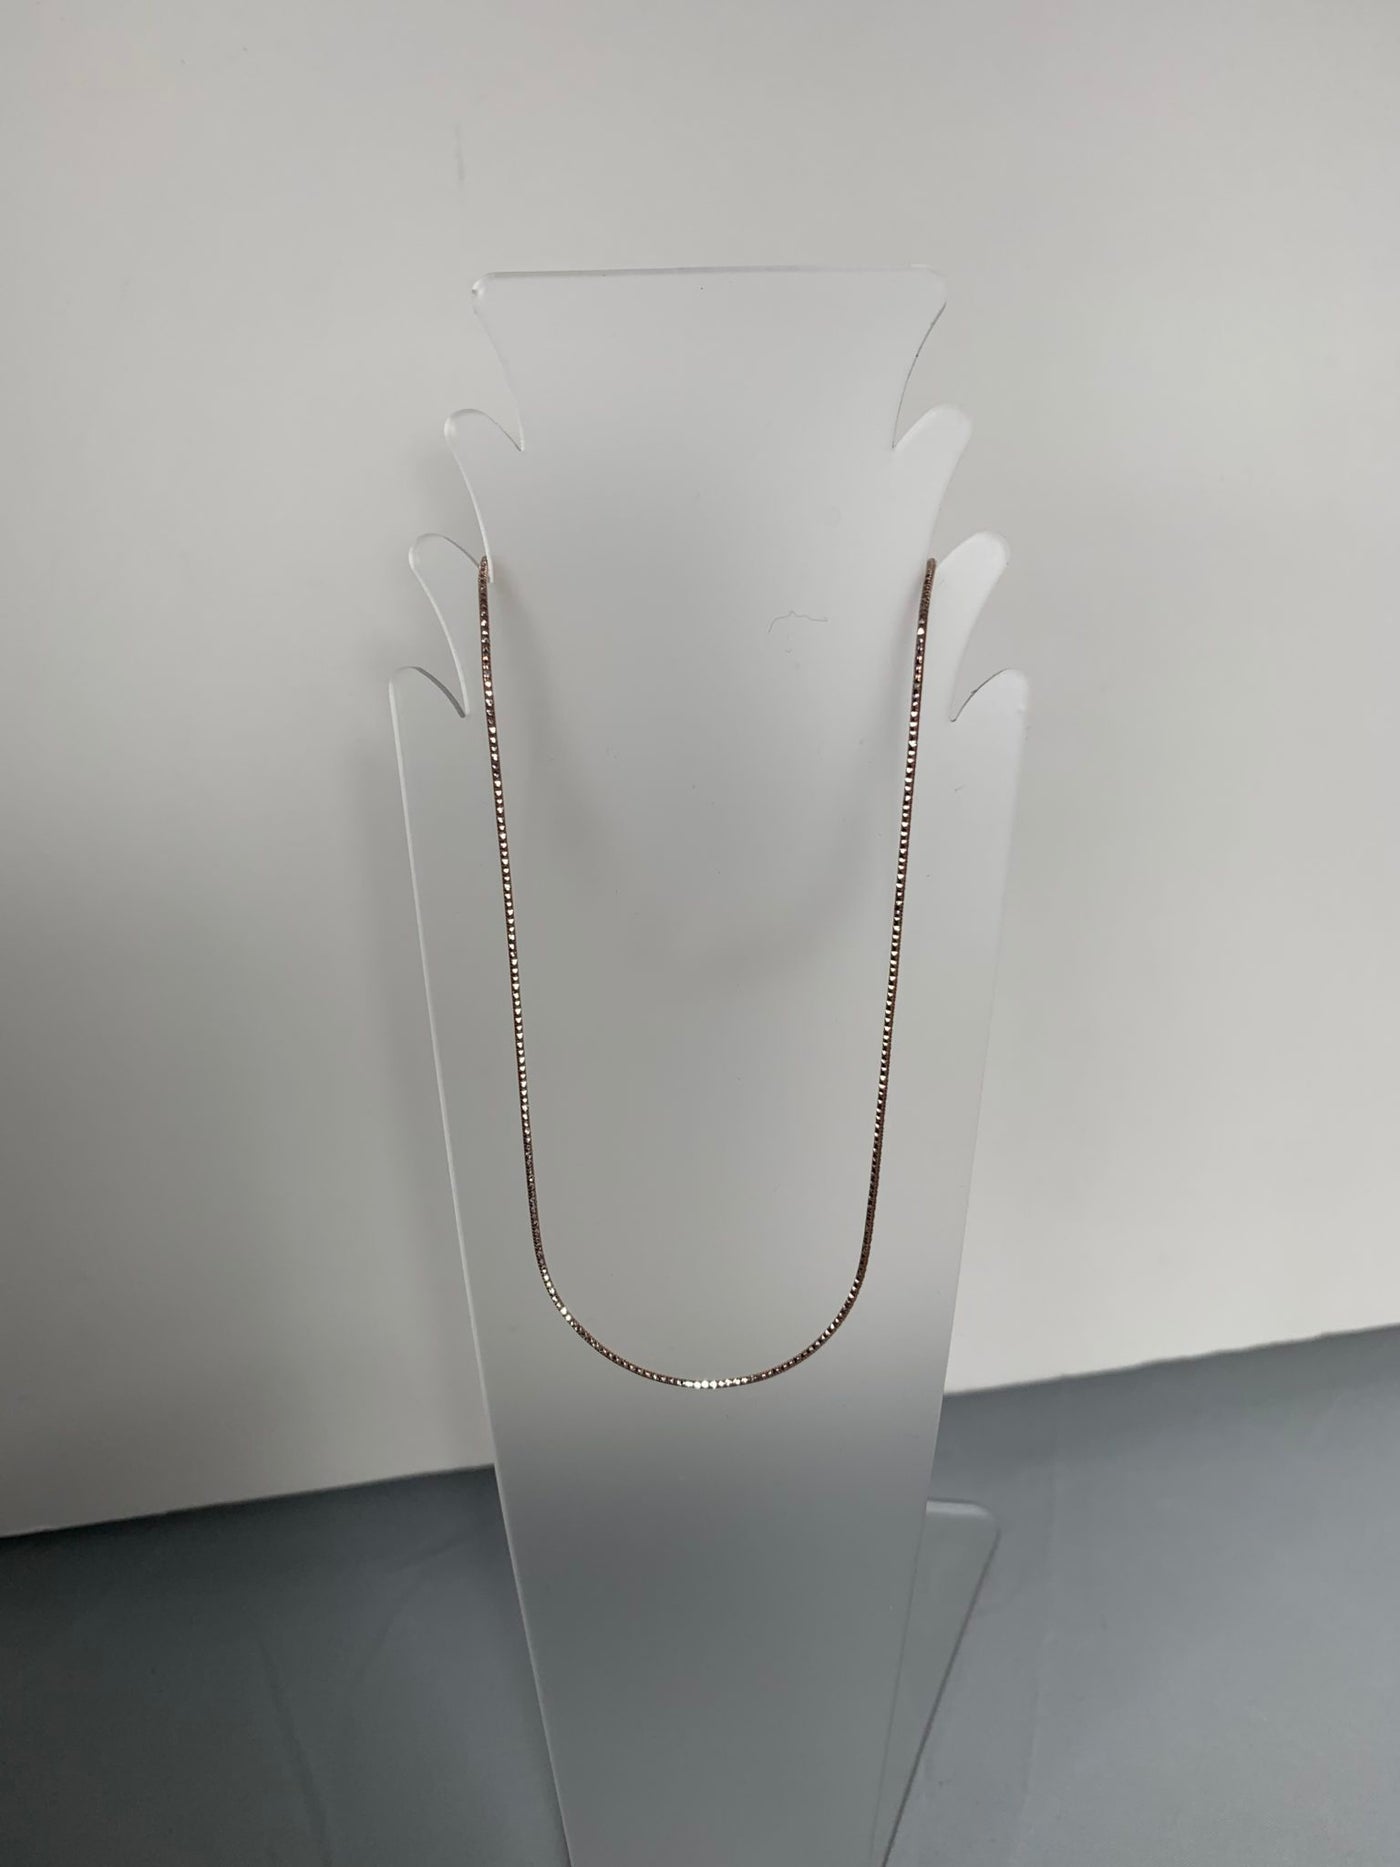 2-tone Silver Chain Necklace with Rose Gold Tone Coating 16"